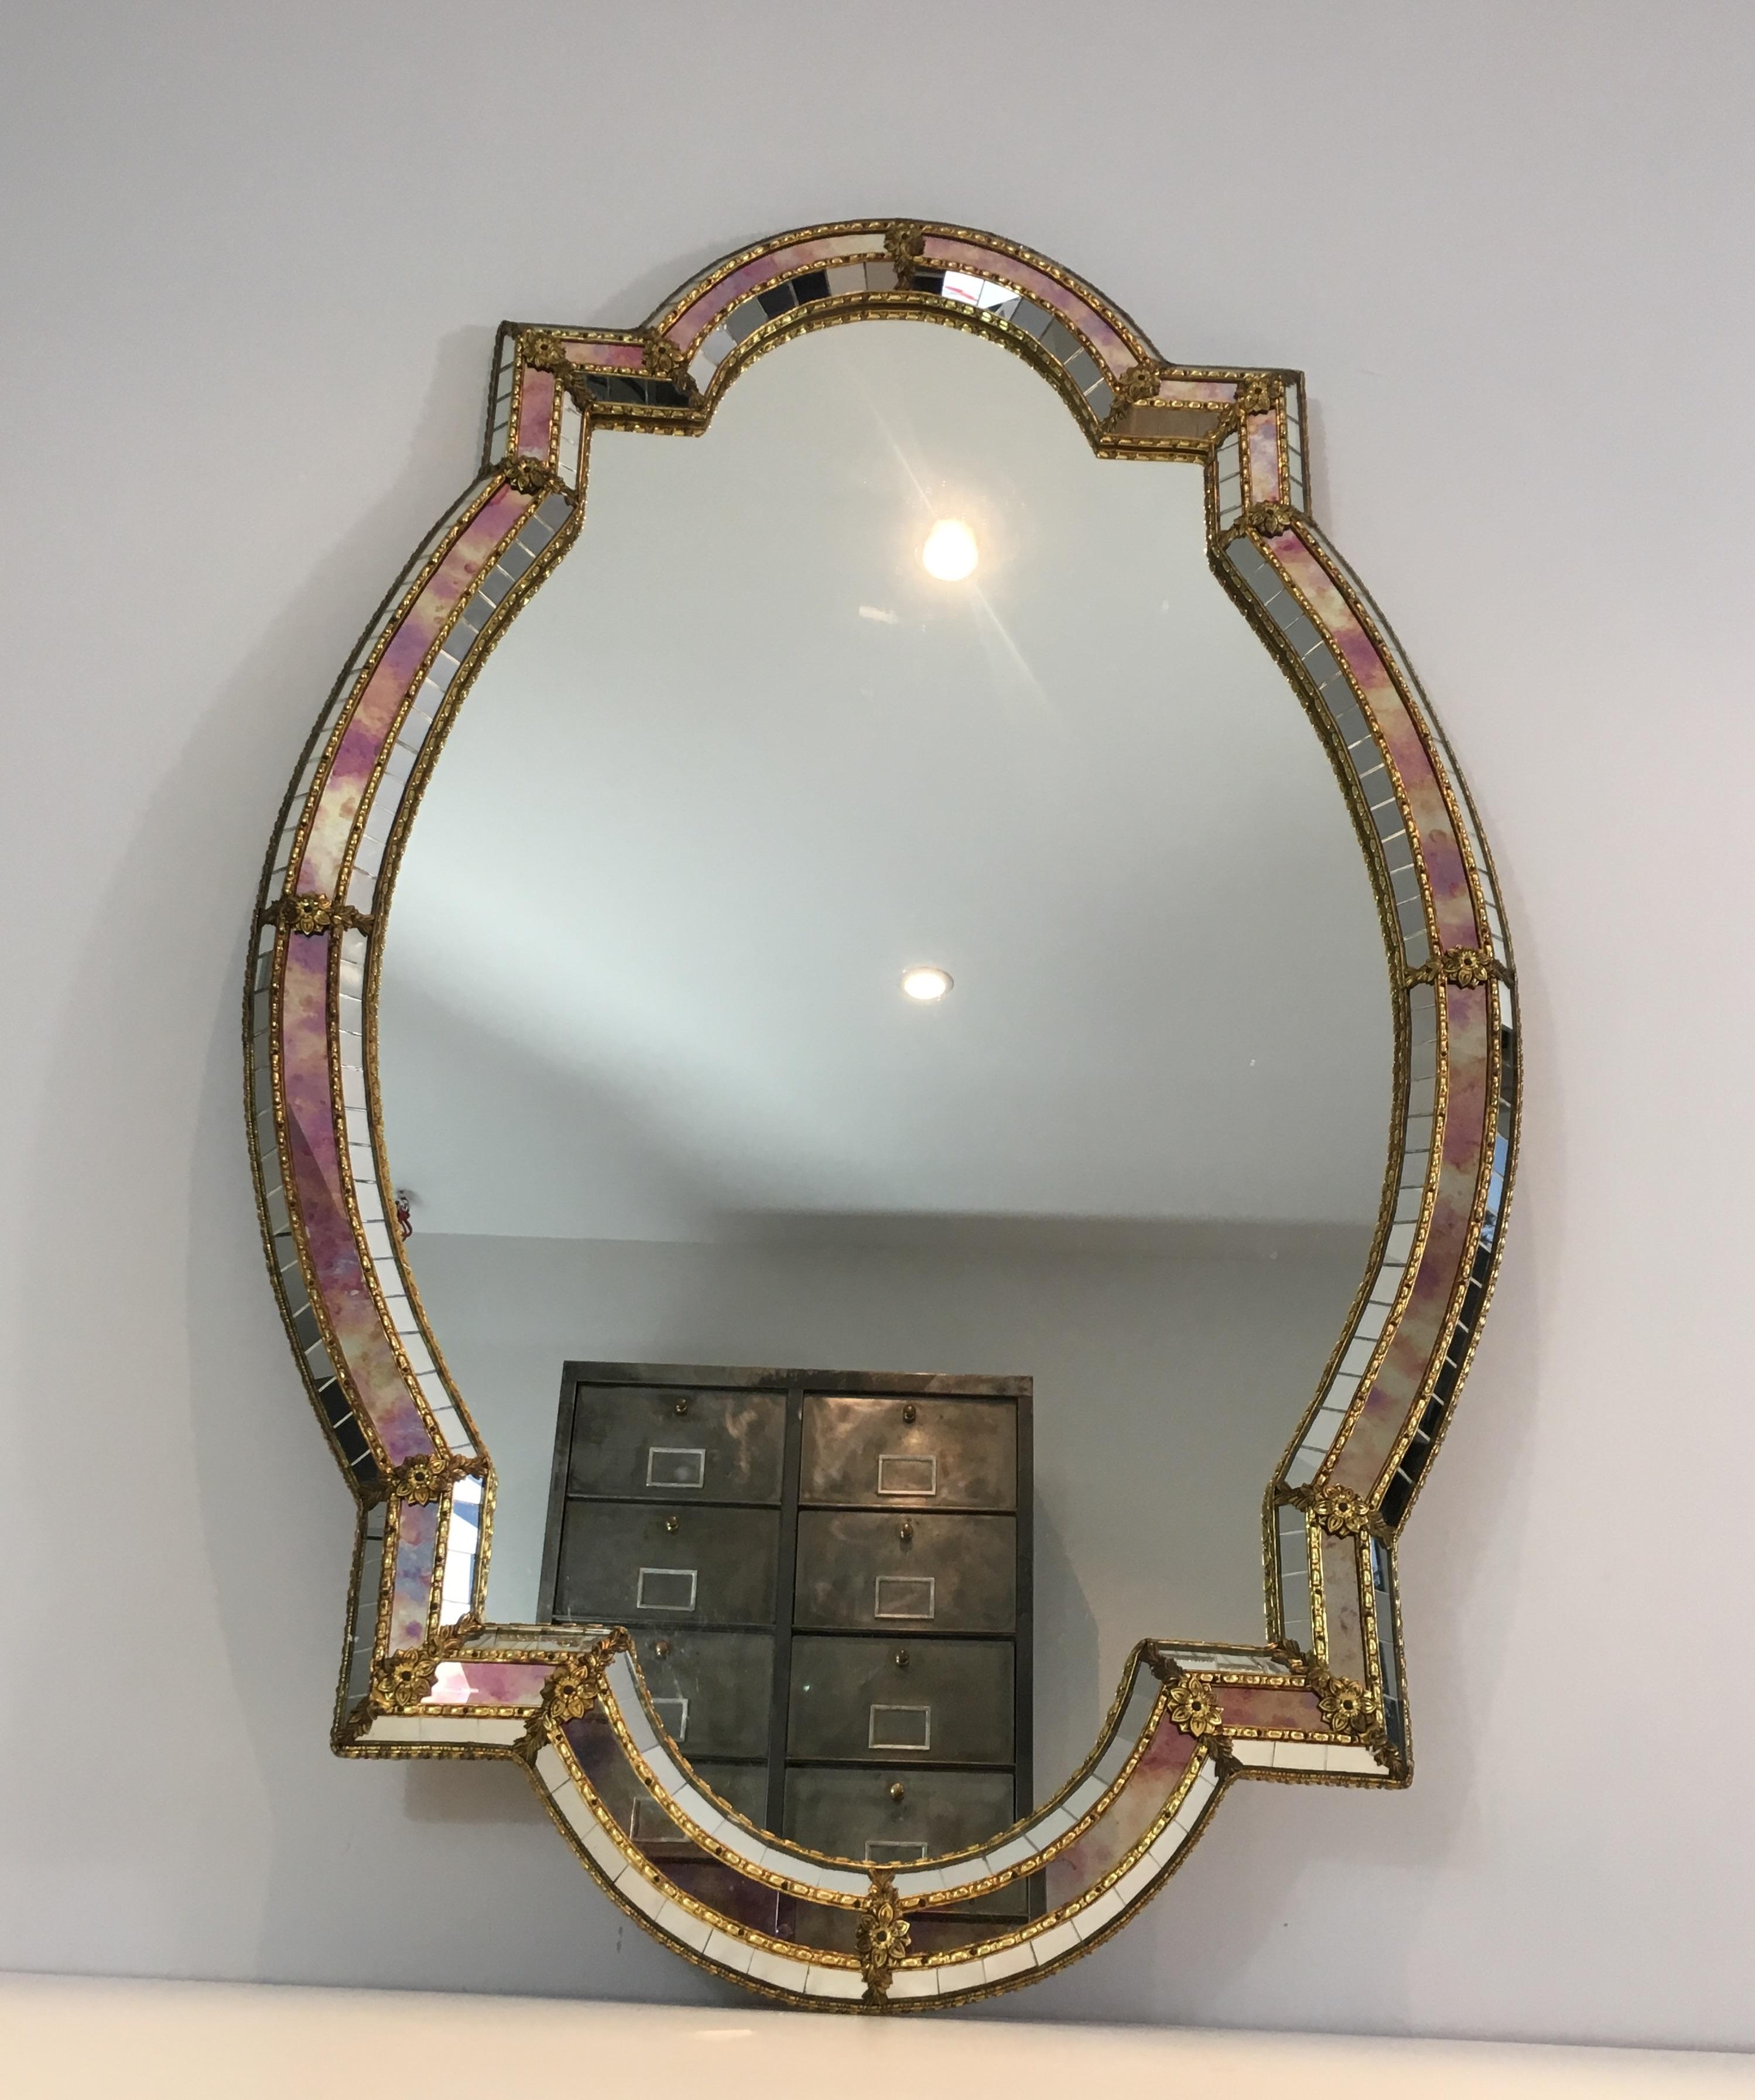 This beautiful and very decorative mirror is made of multi-faceted mirrors constituted of mirror mosaics with purple-pink reflects, brass flowers and garlands. This is a French work, circa 1970.